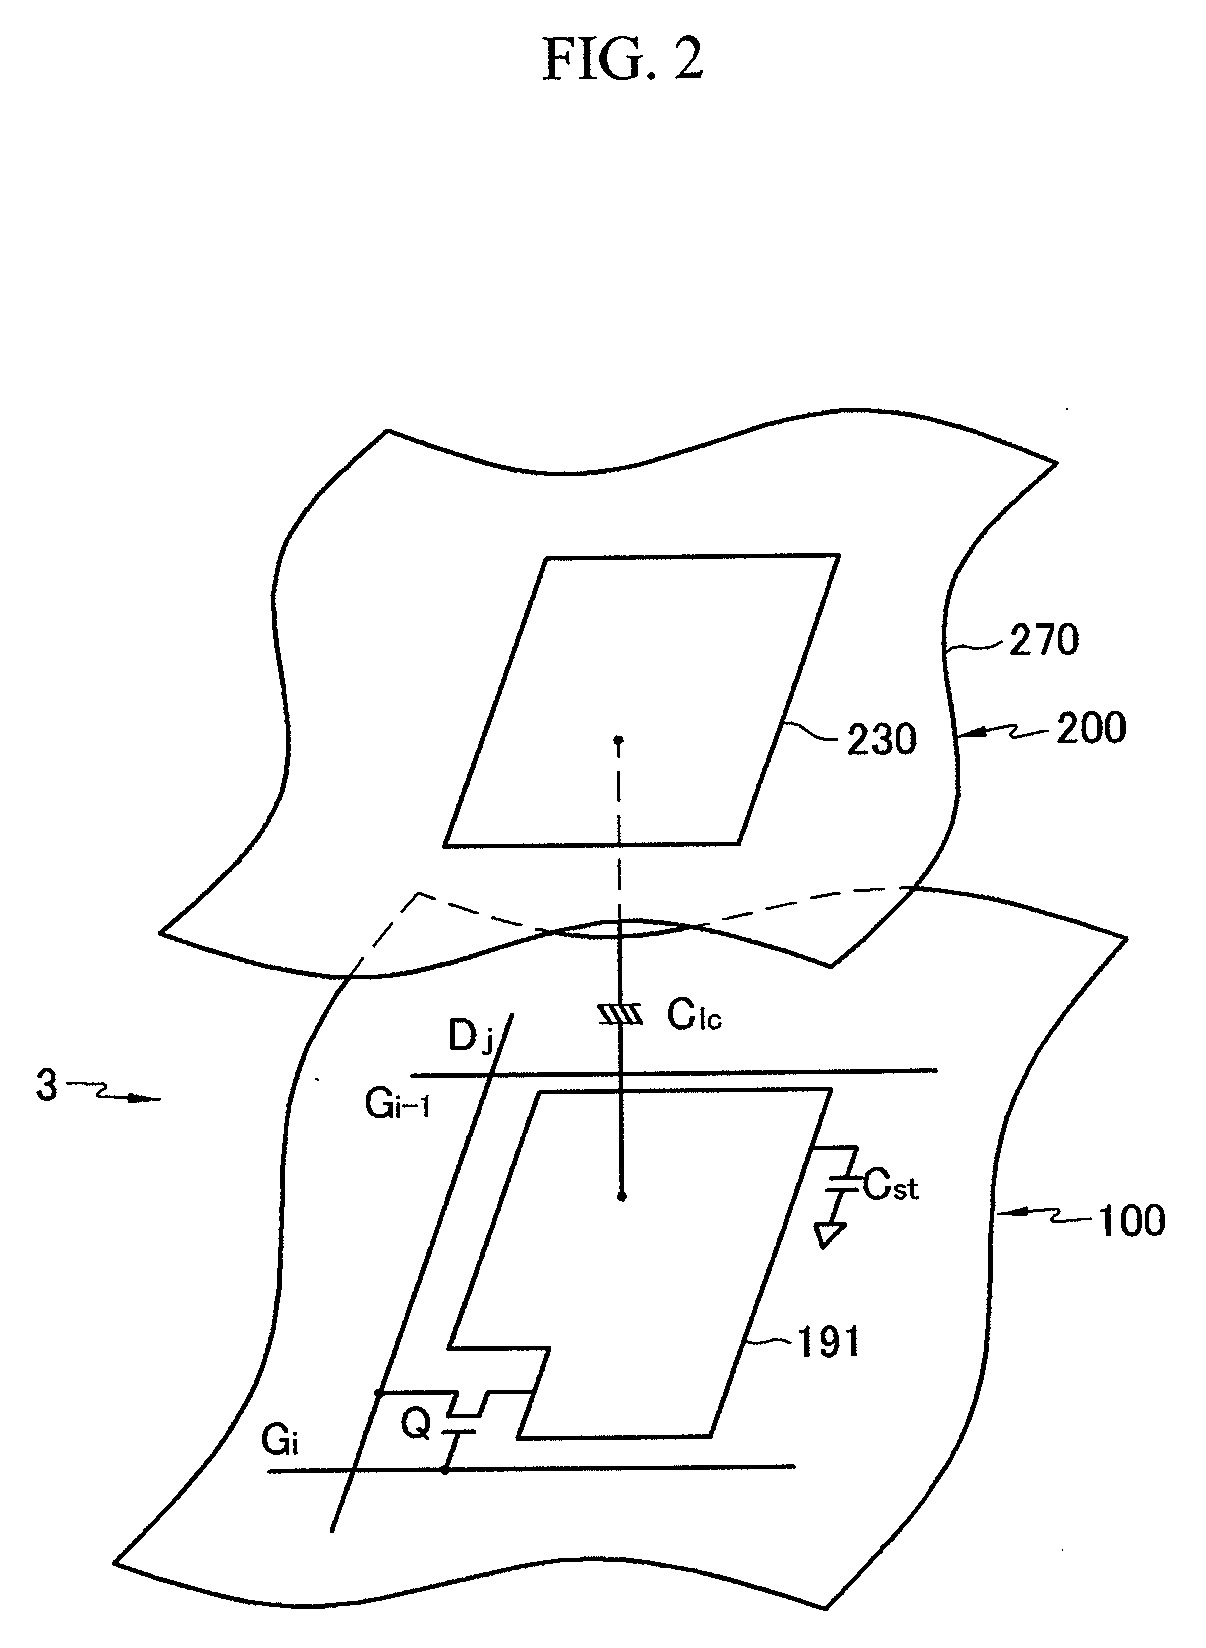 Display device including integrated touch sensors